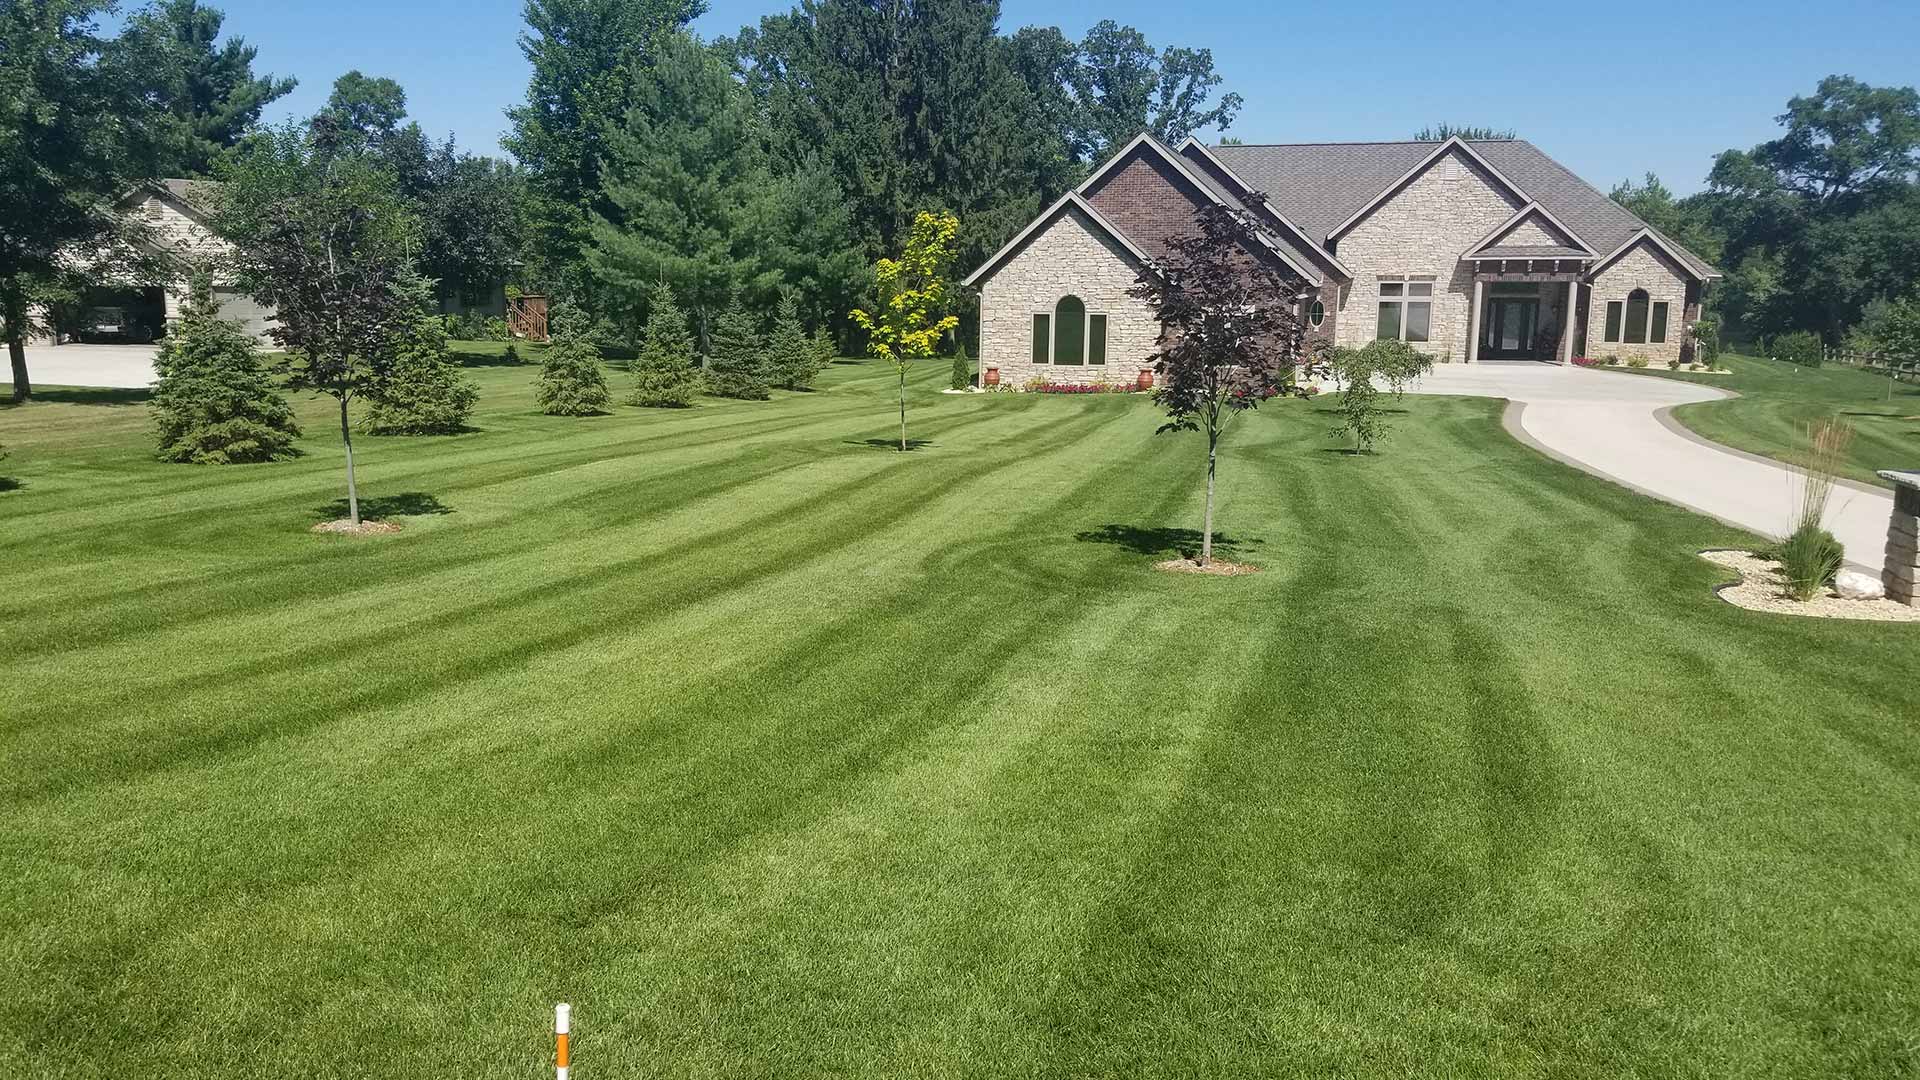 St. Cloud, MN home with regular lawn mowing services.